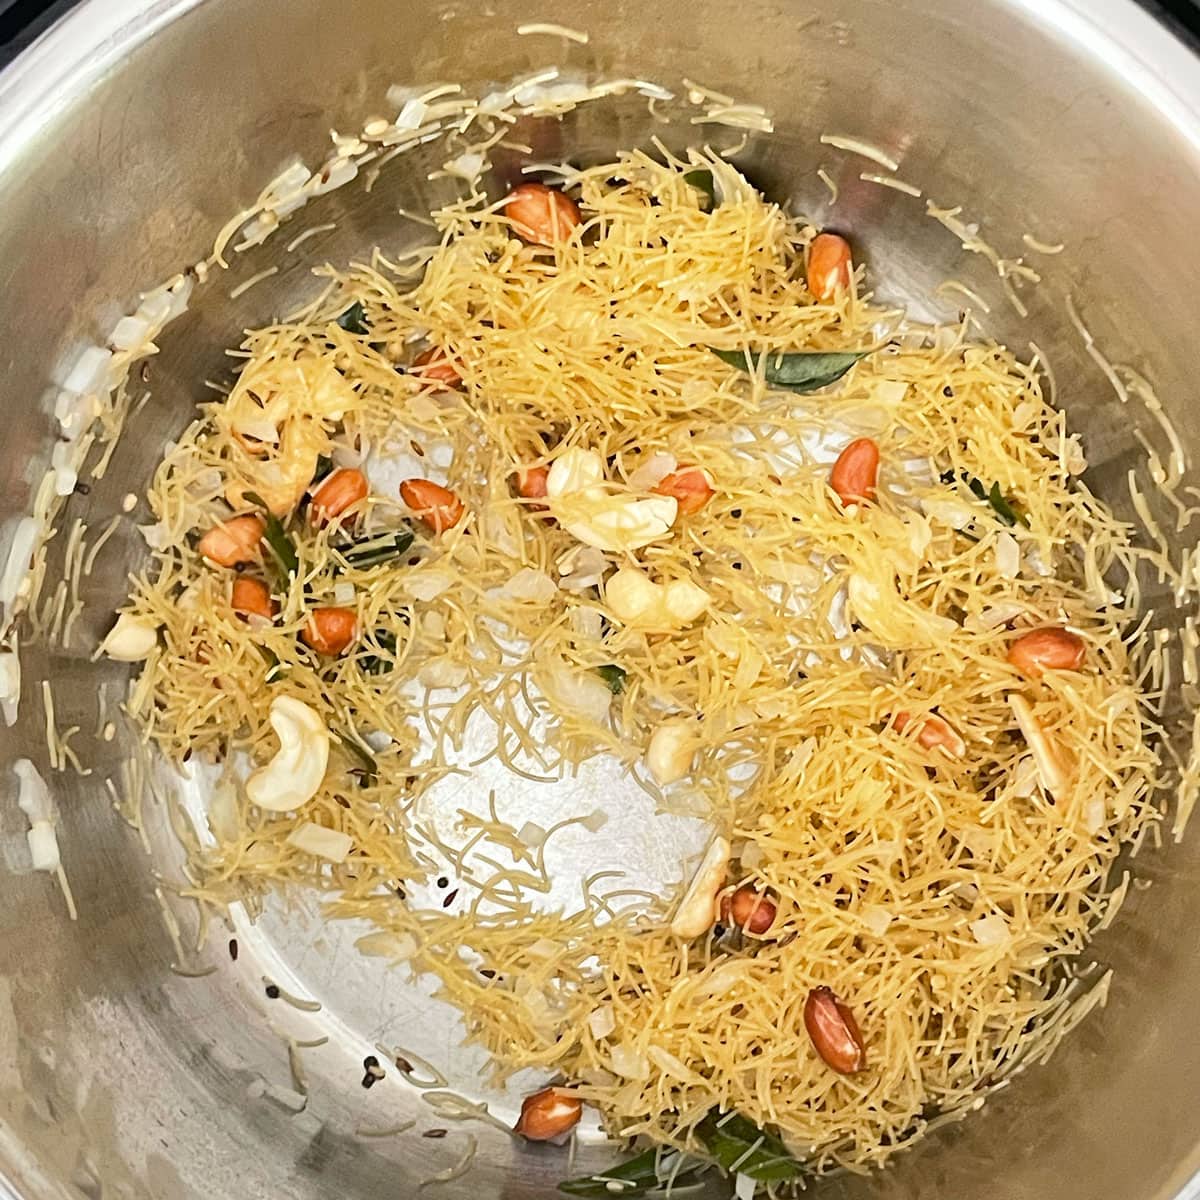 Sauted ingredients for Vermicelli Upma.